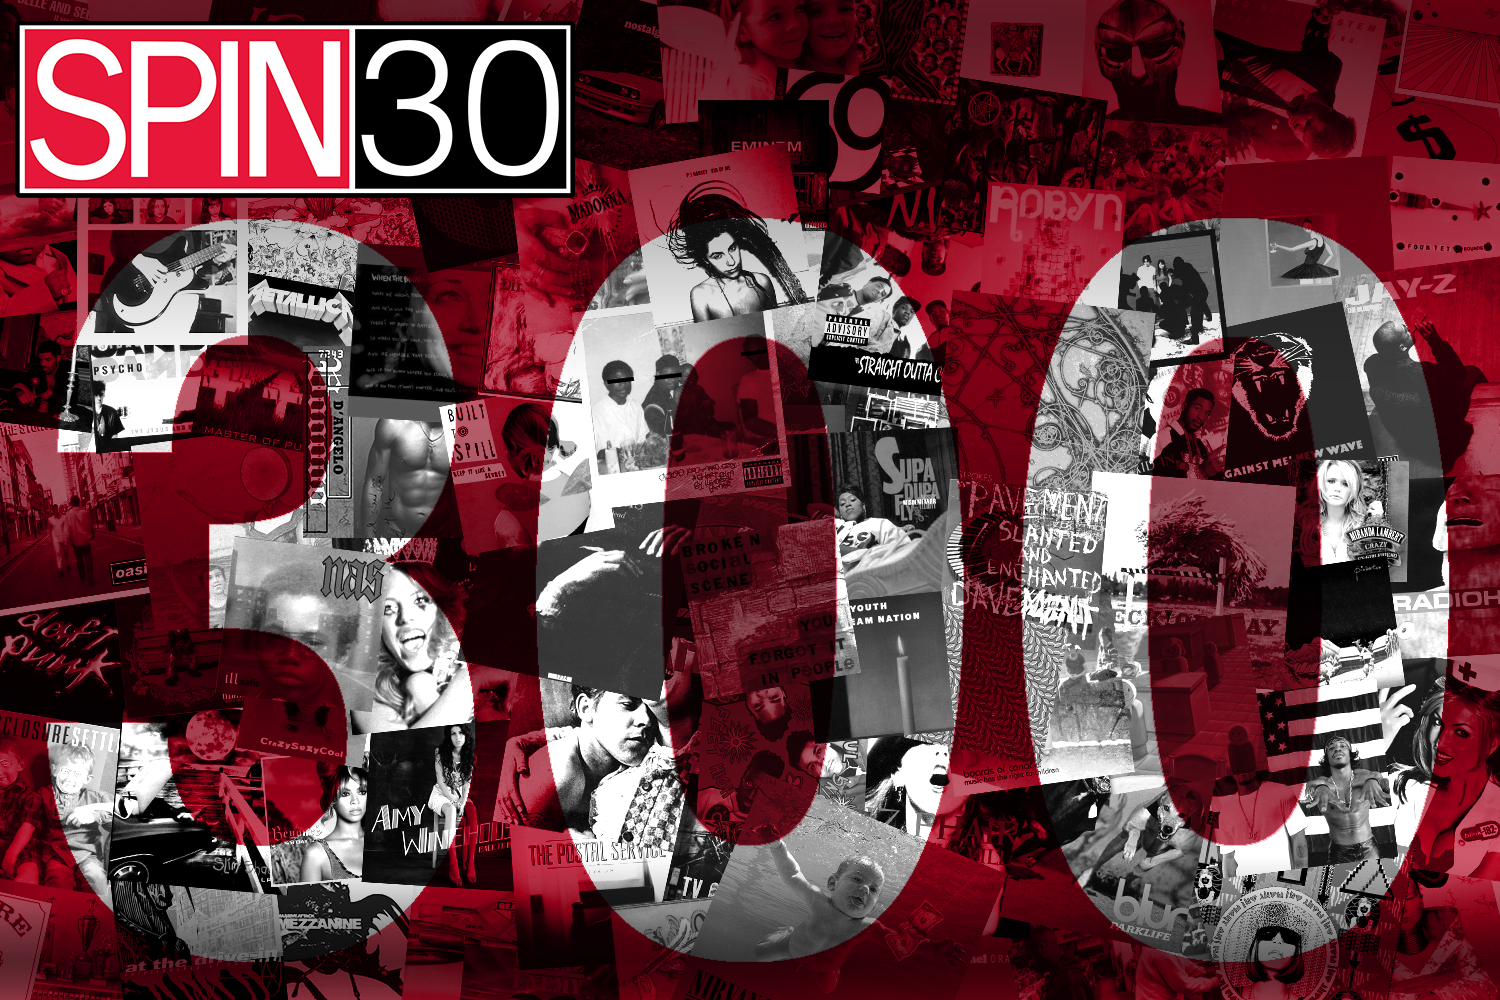 The 300 Best Albums of the Past 30 Years (1985-2014)